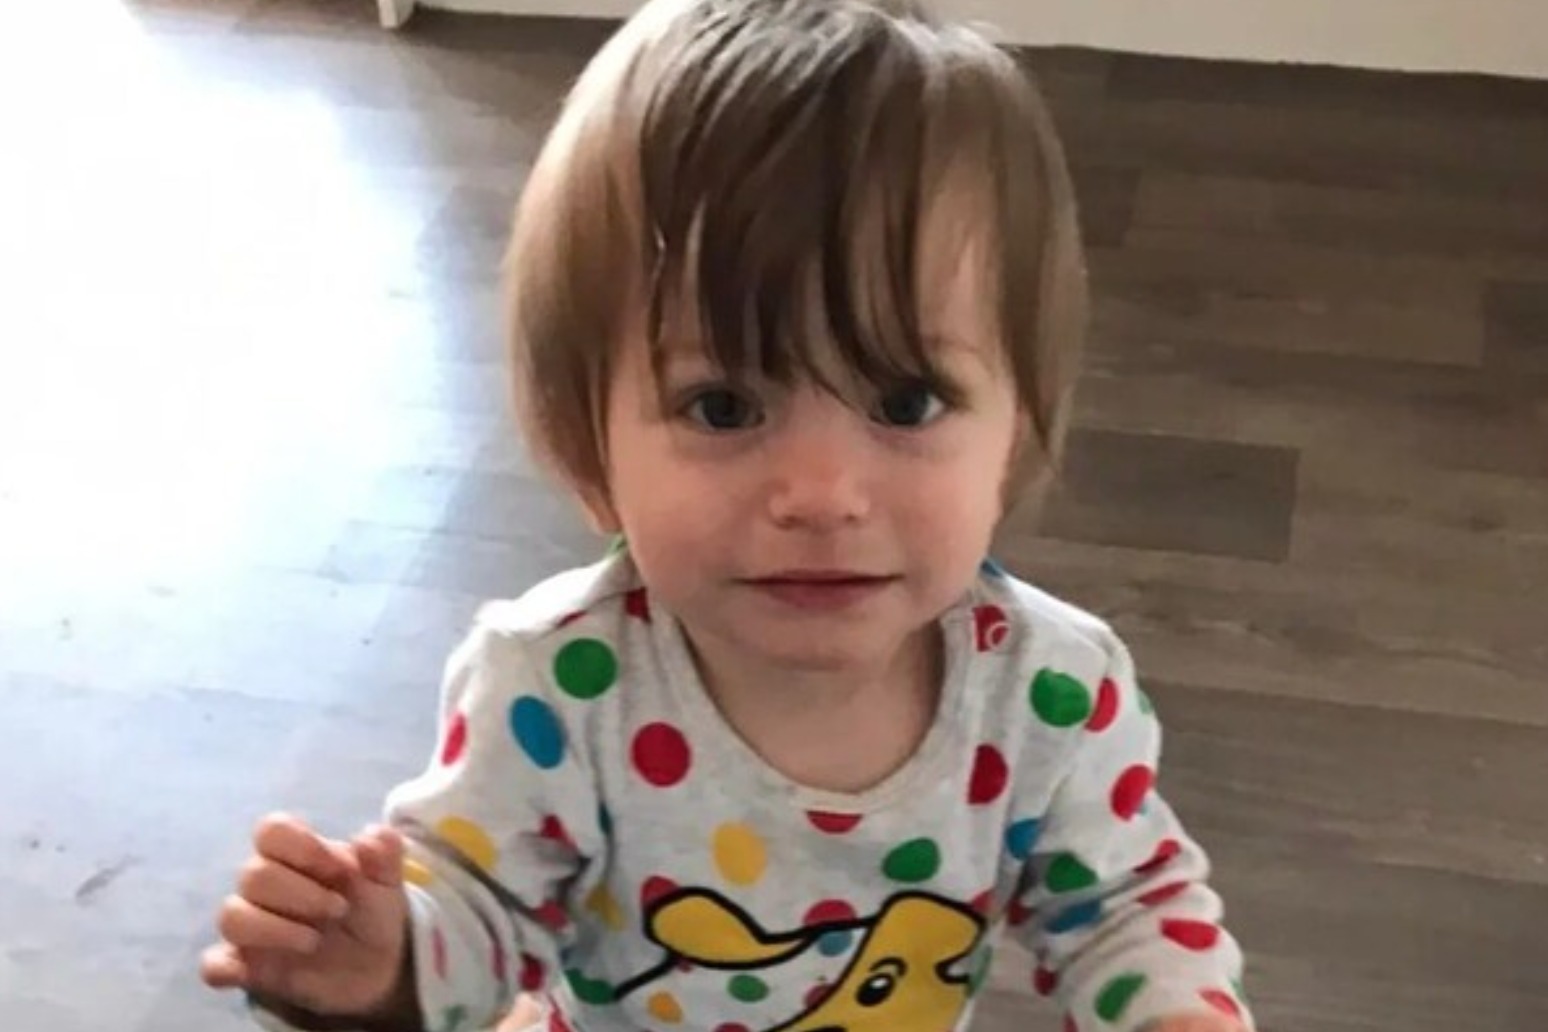 Police force referred to watchdog after toddler found dead next to dad 